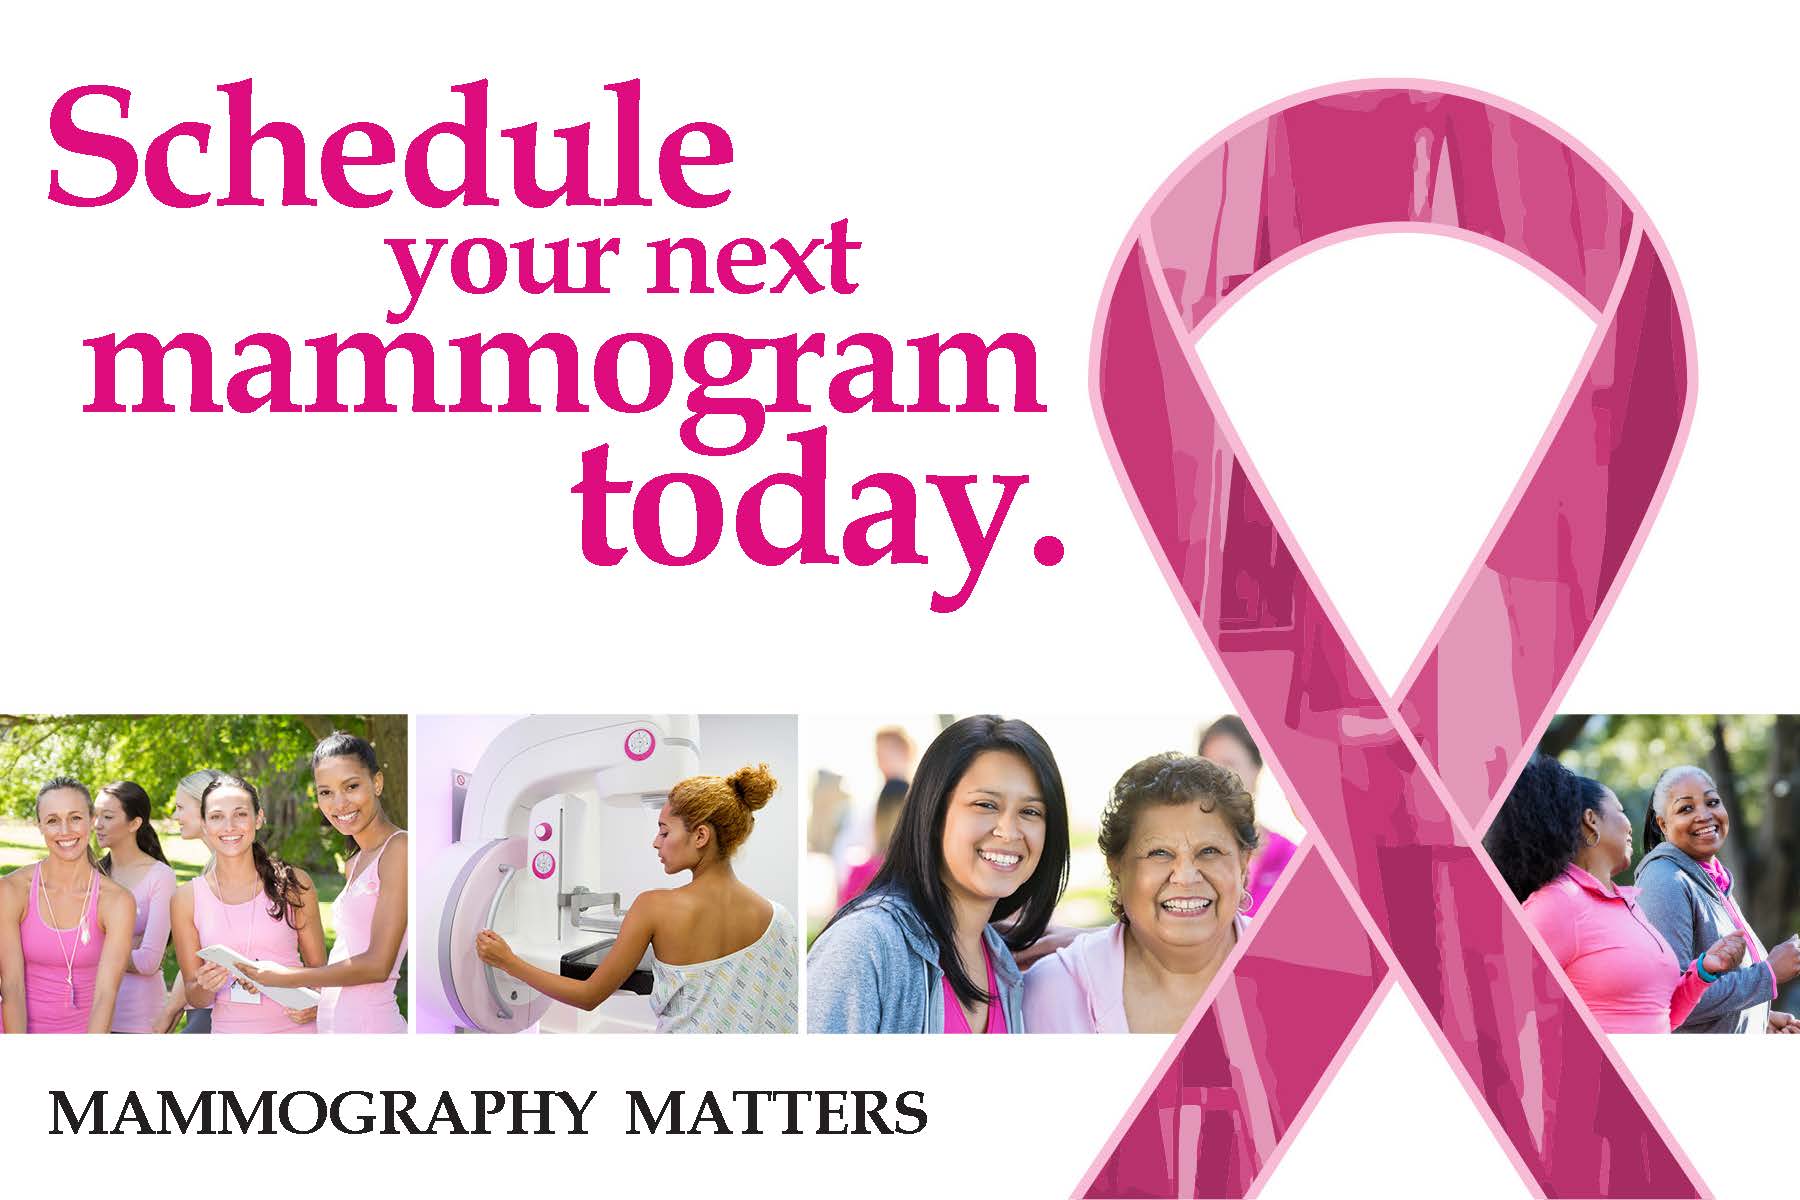 Text: Schedule your next mammogram today - images of ethnically diverse women